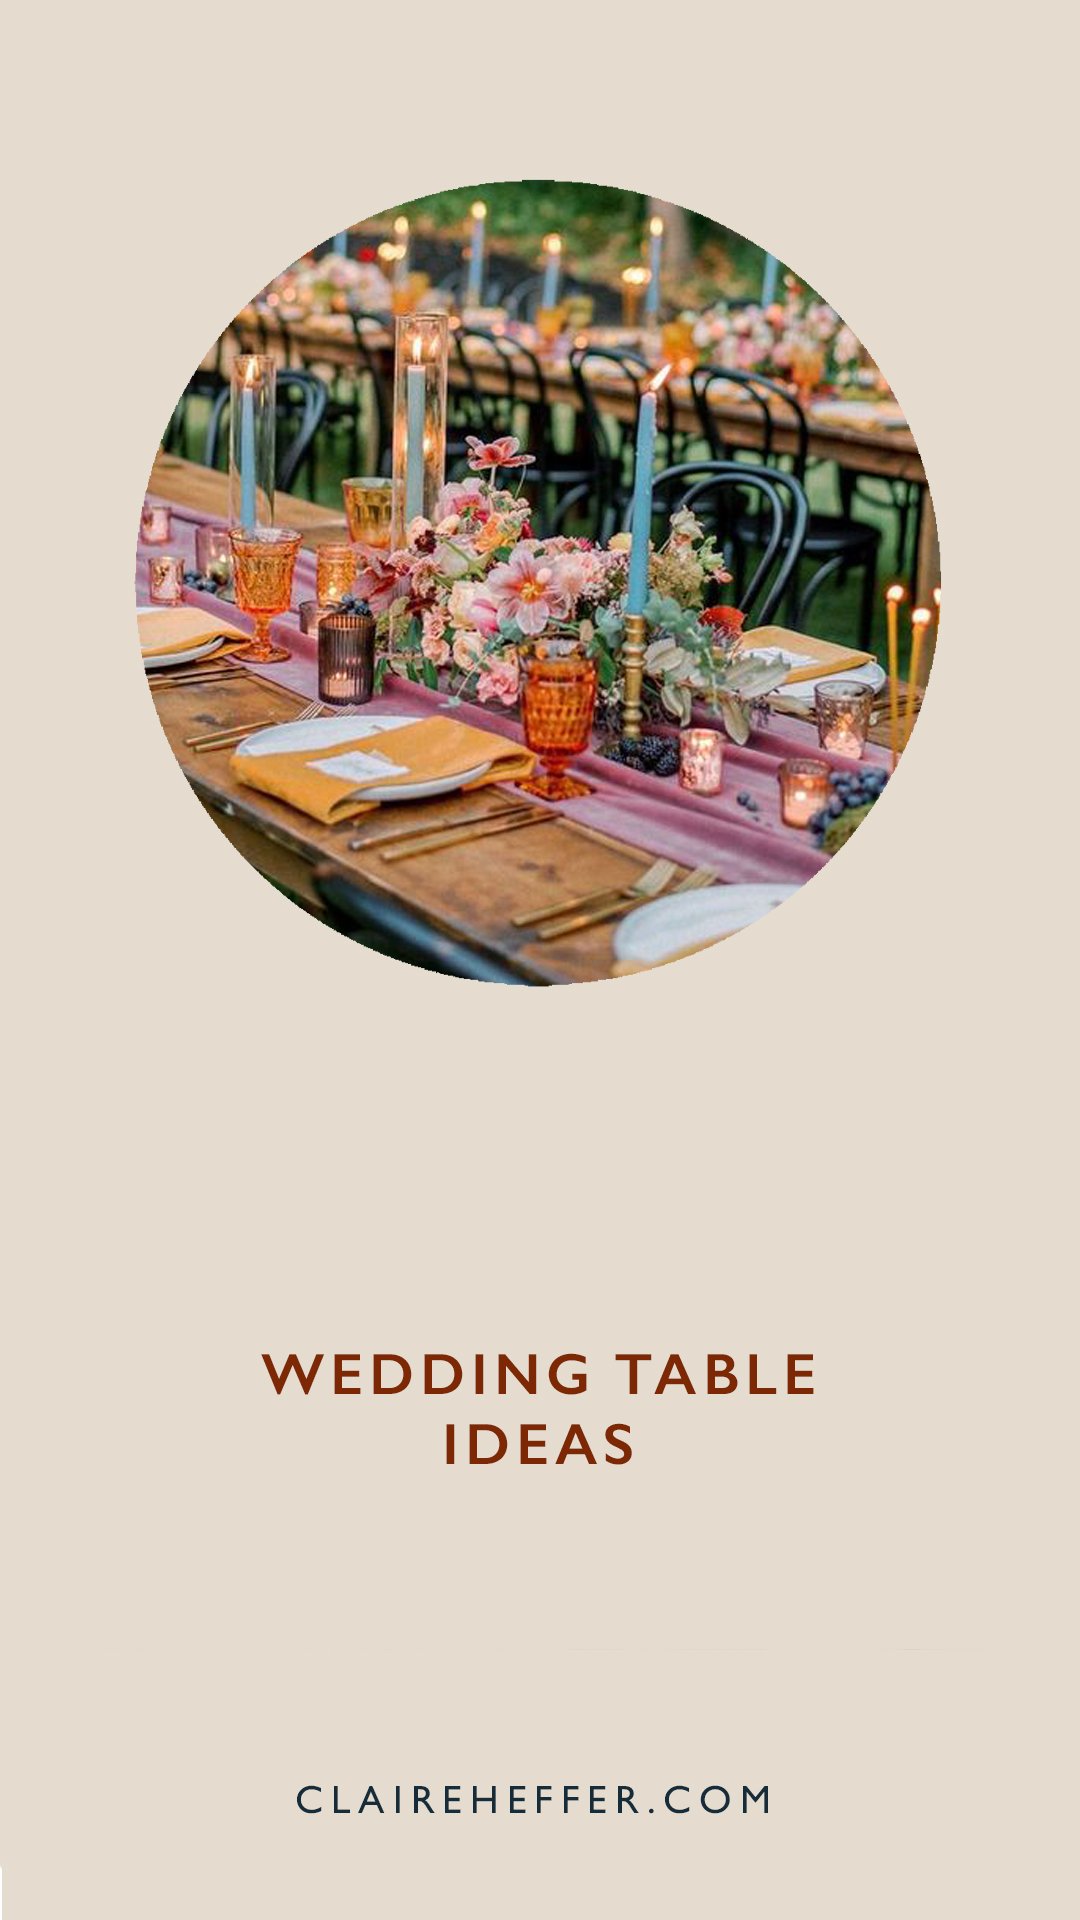 _TABLE STYLING20.jpg